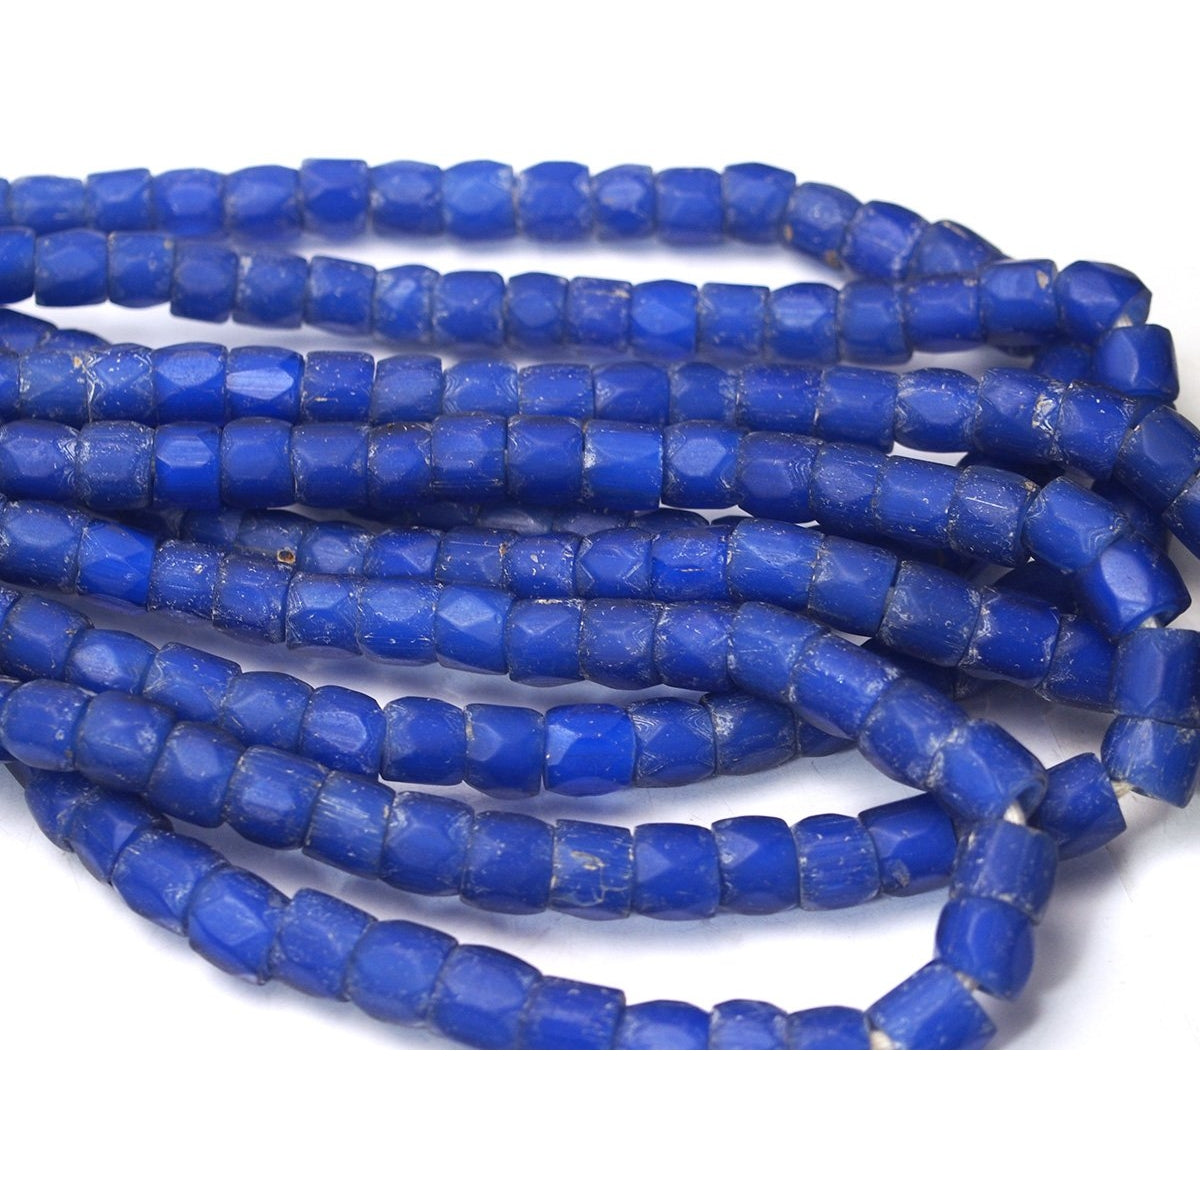 19th Century "Russian Blues" Faceted Tubes – Beads of Paradise